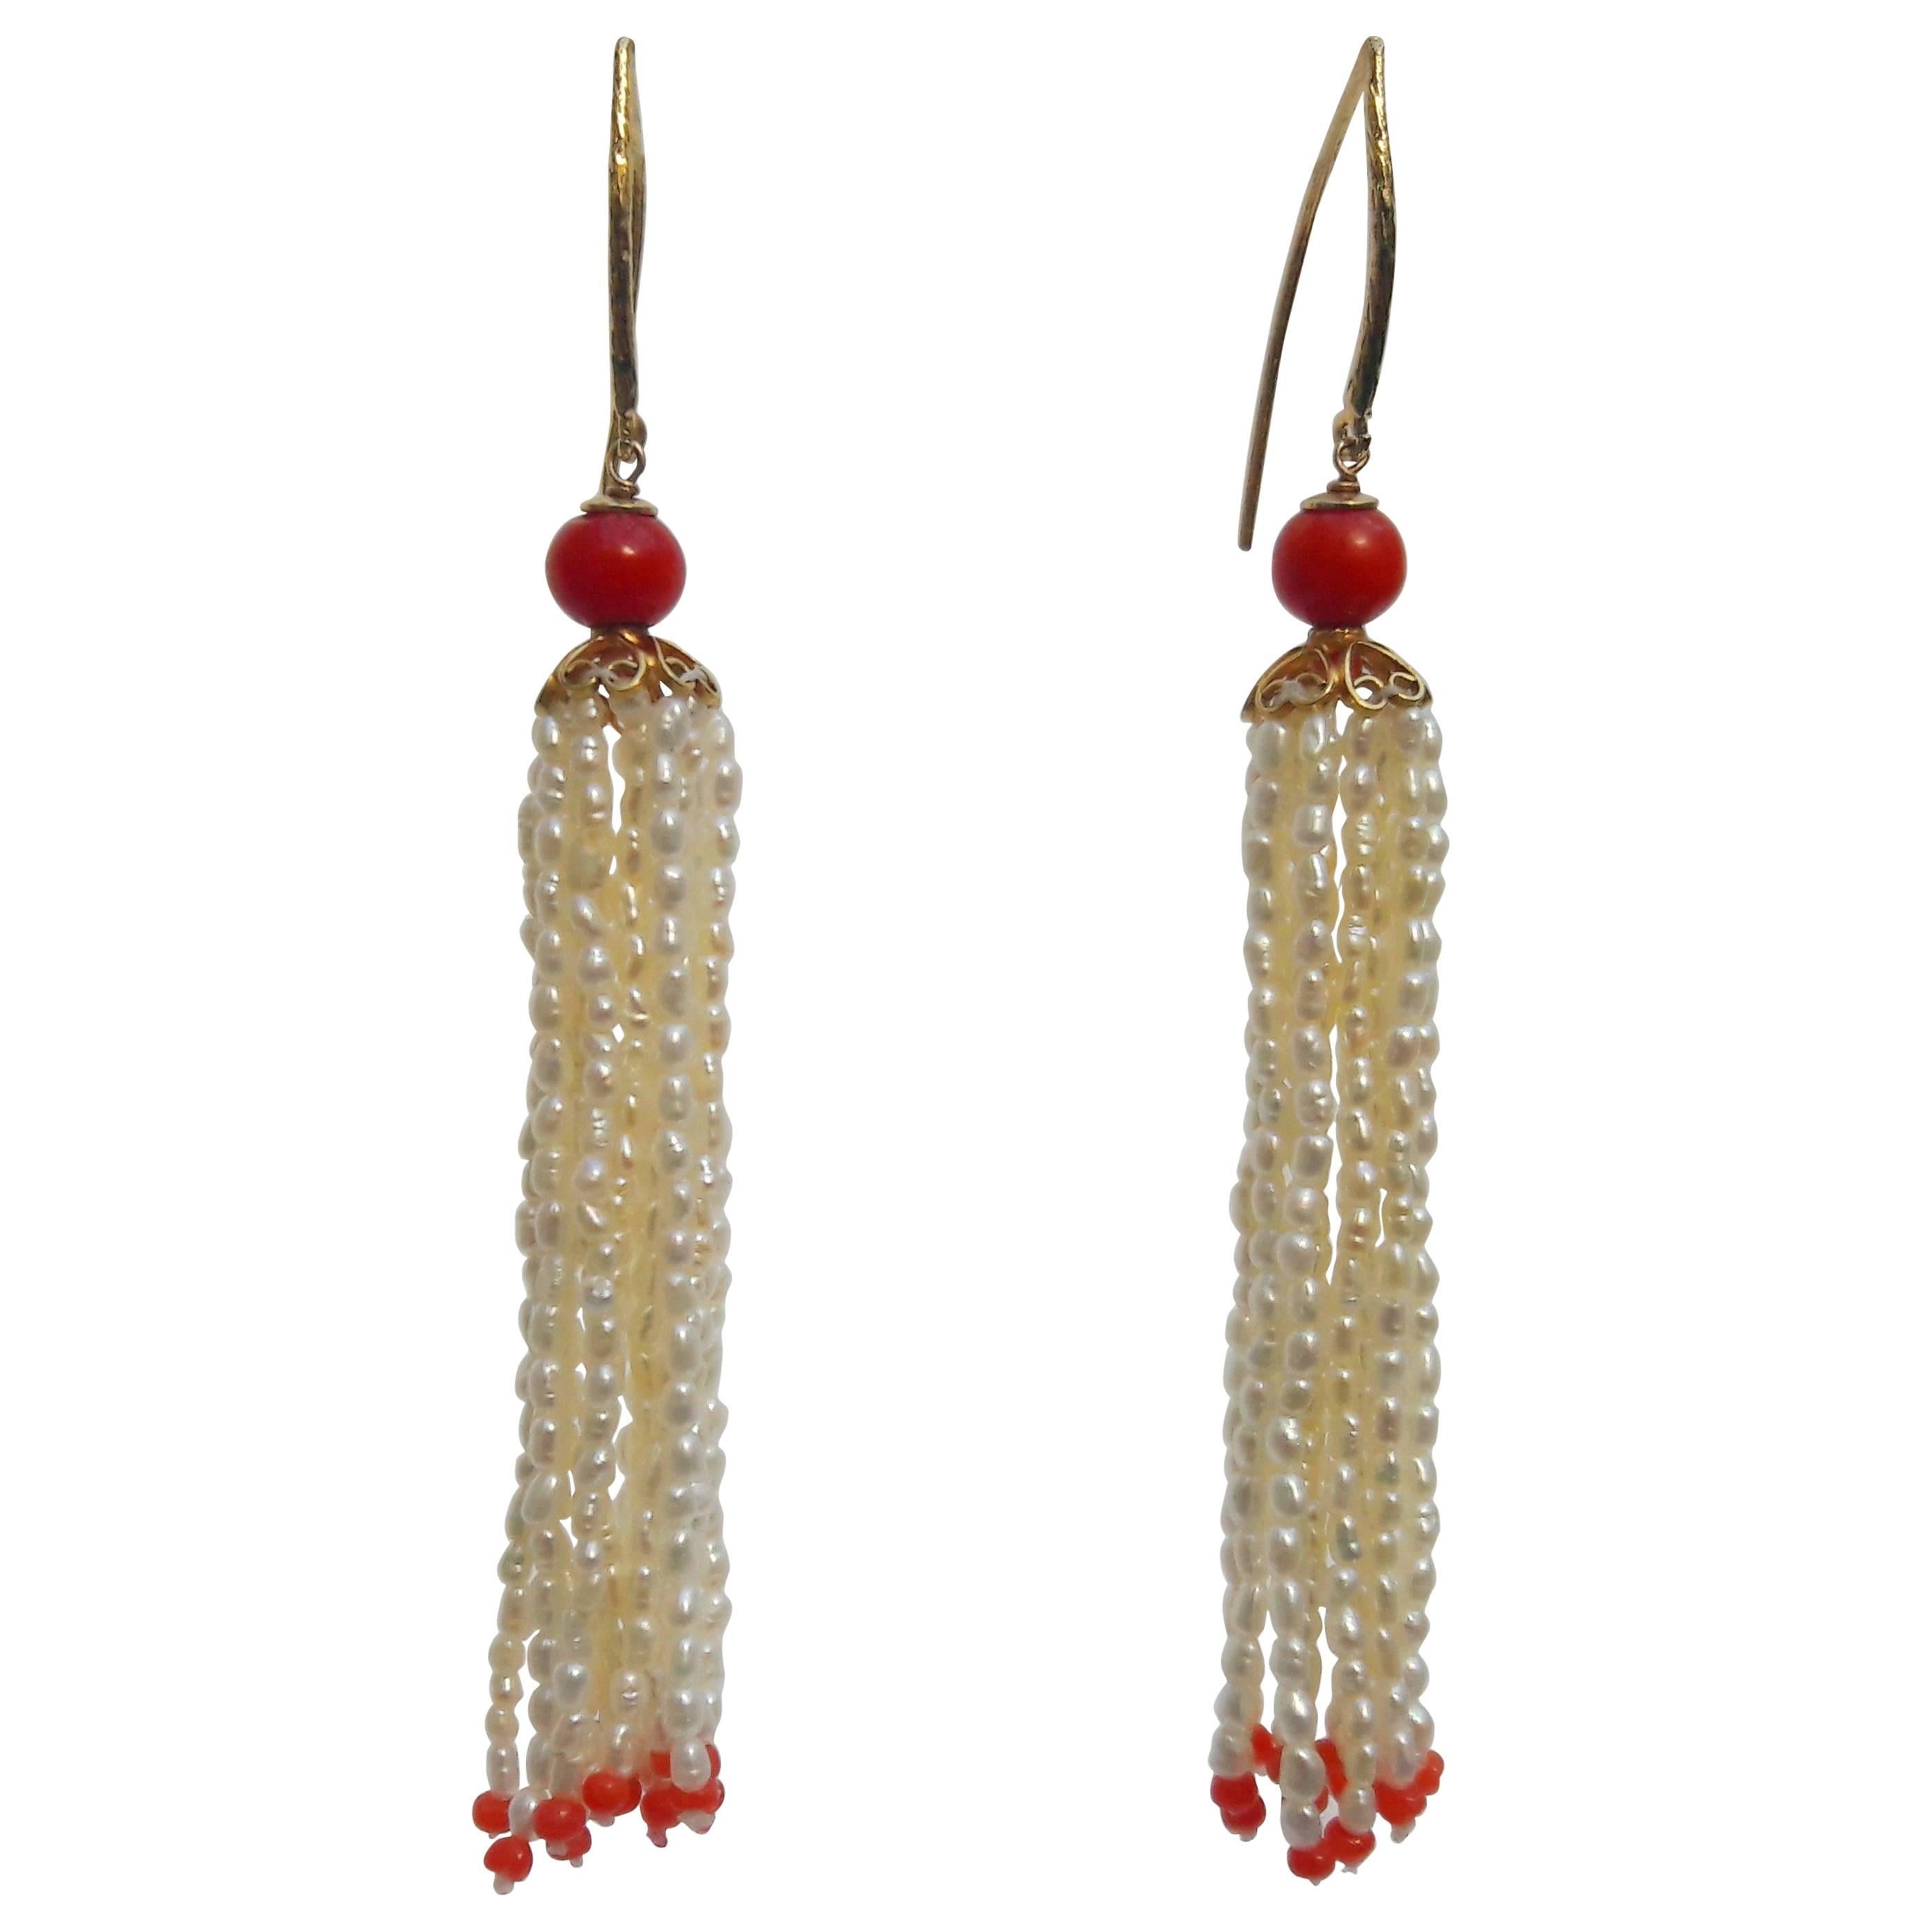 Marina J. Pearl and Coral Tassel Earrings with Gold Findings and Filigree Cup